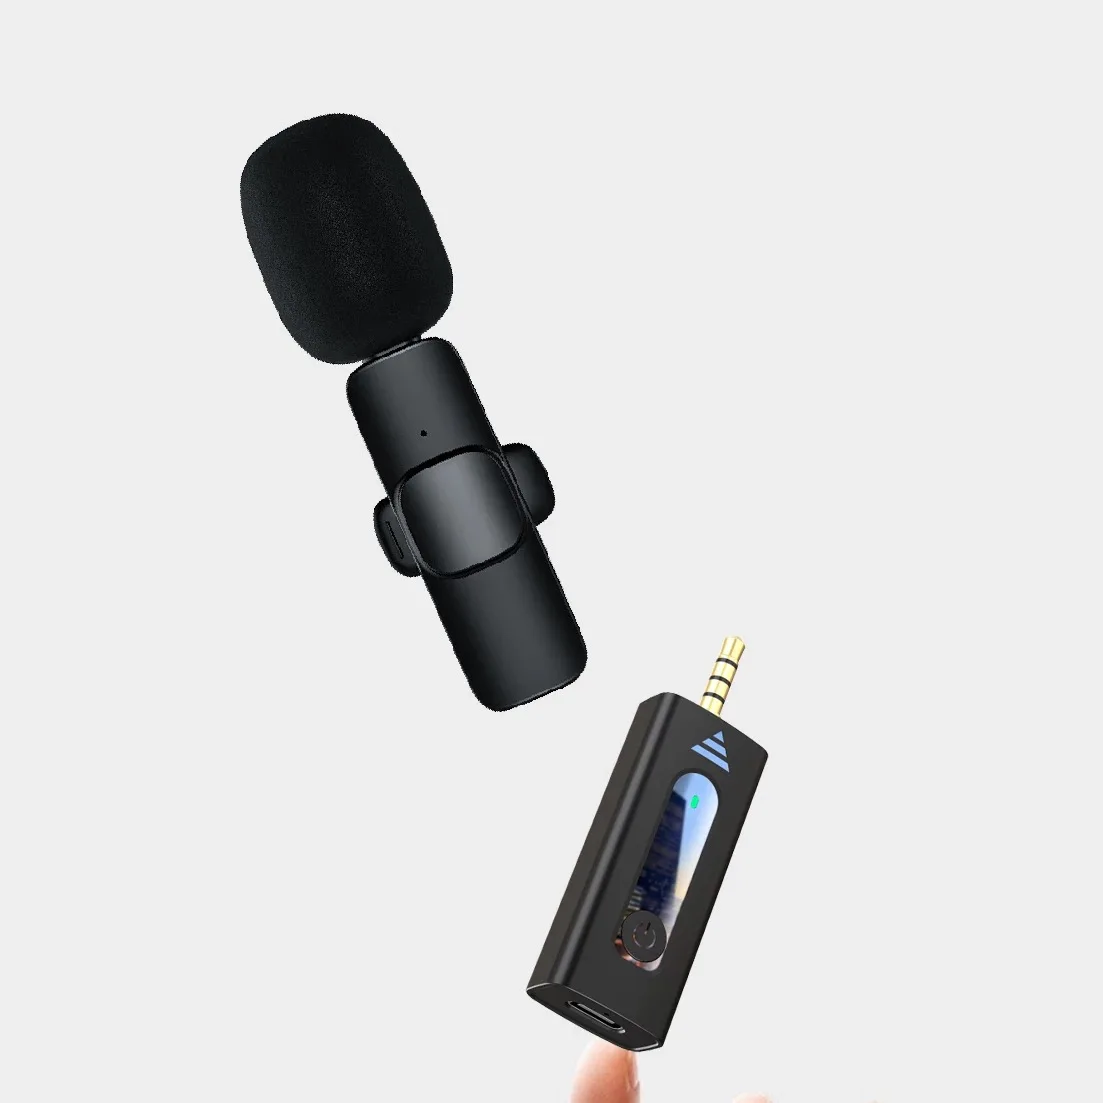 K35 wireless microphone outdoor lapel clip on 3.5mm audio port wireless microphone for camera sound card